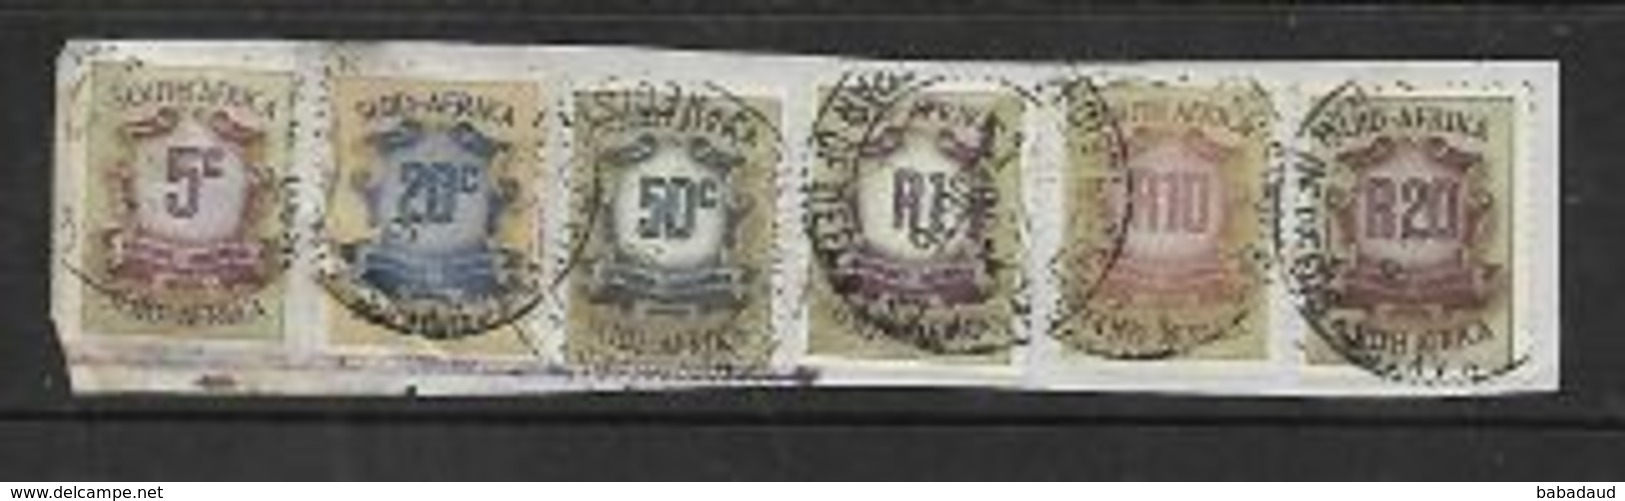 S.Africa, Revenue Stamps, R20, R10, R1, 50c, 20c, 5c Used REGISTRAR OF DEEDS 27 AUG 76 - Used Stamps